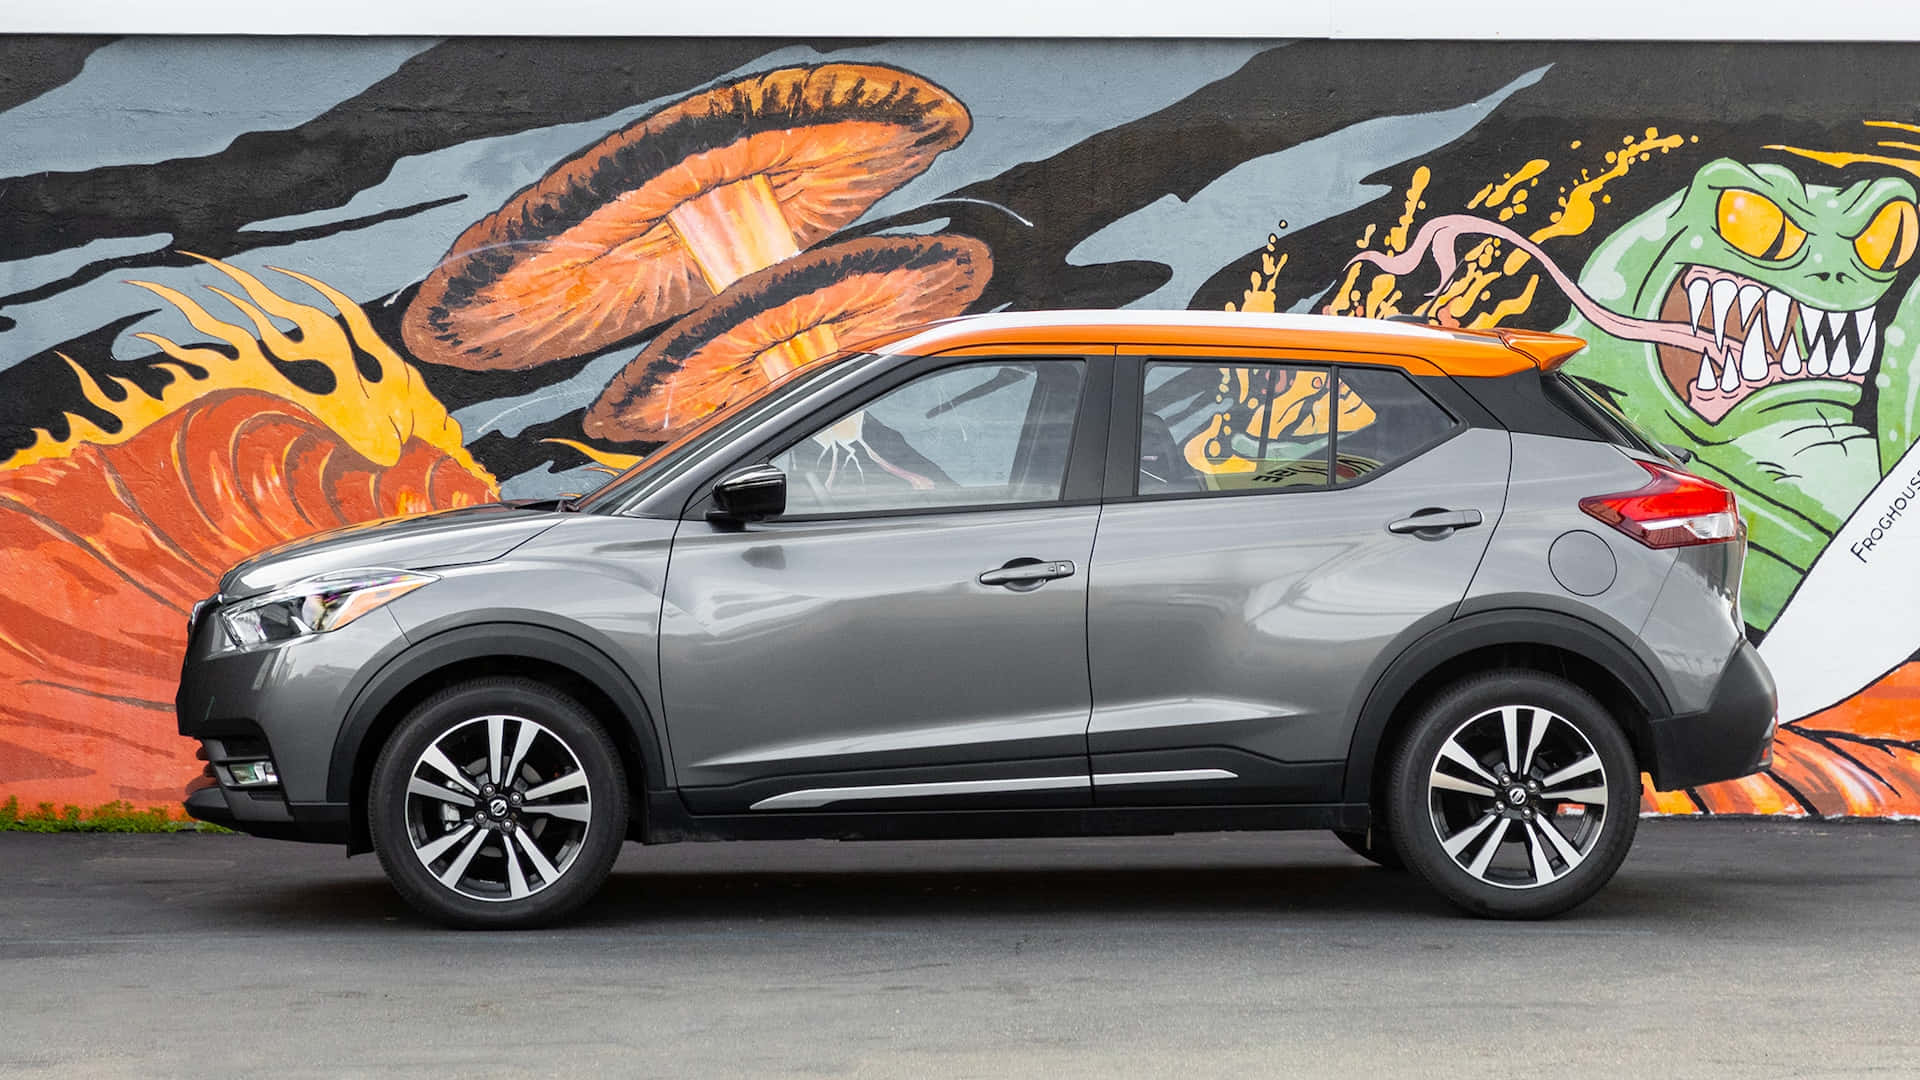 A Stylish Spin On The Road - Nissan Kicks Wallpaper